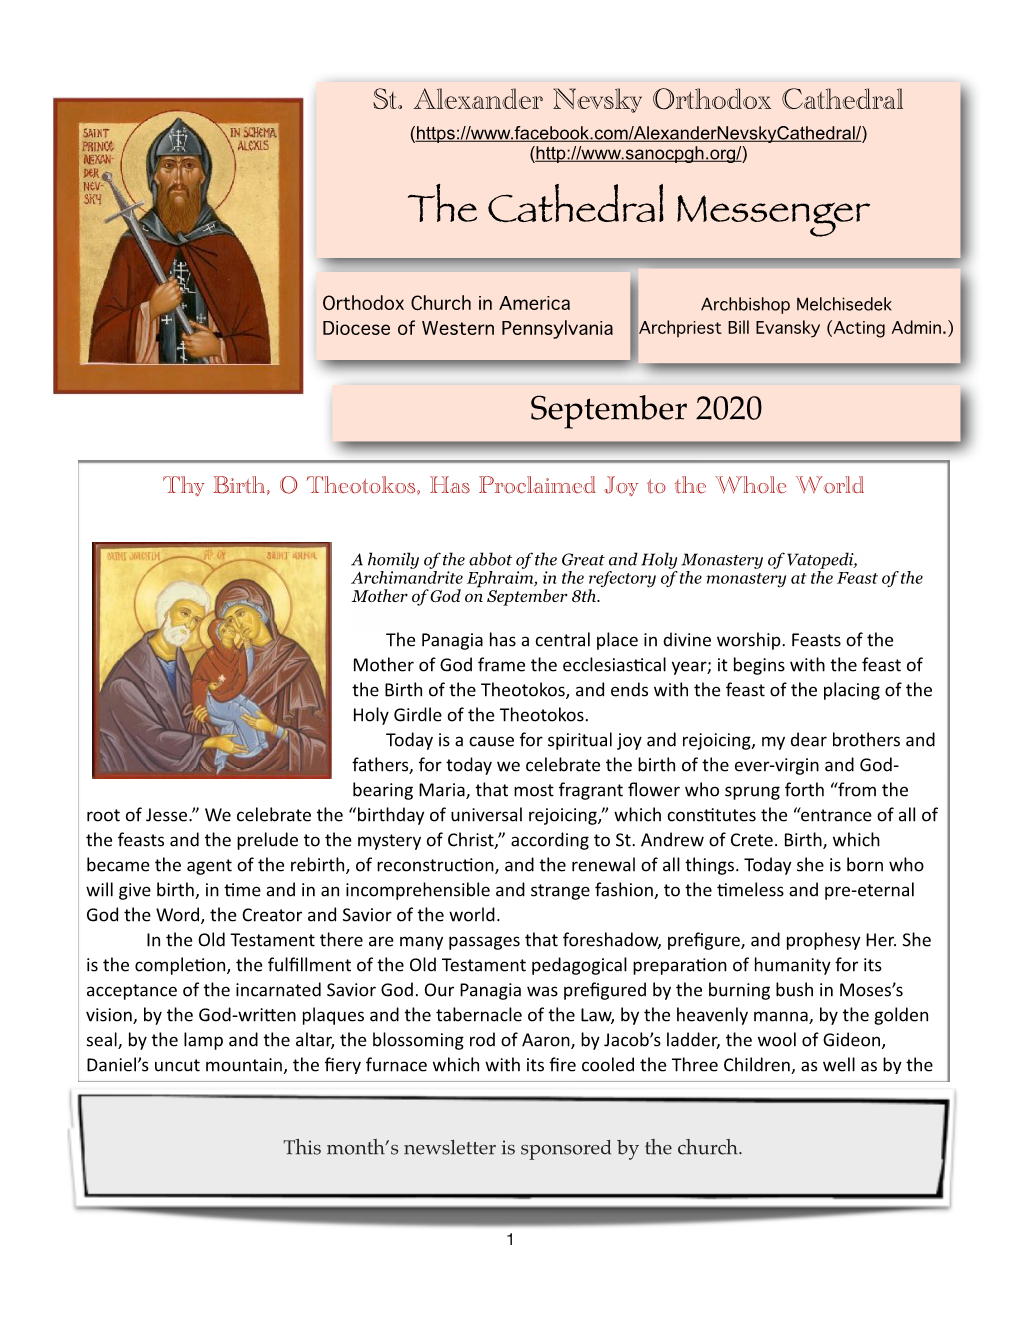 The Cathedral Messenger